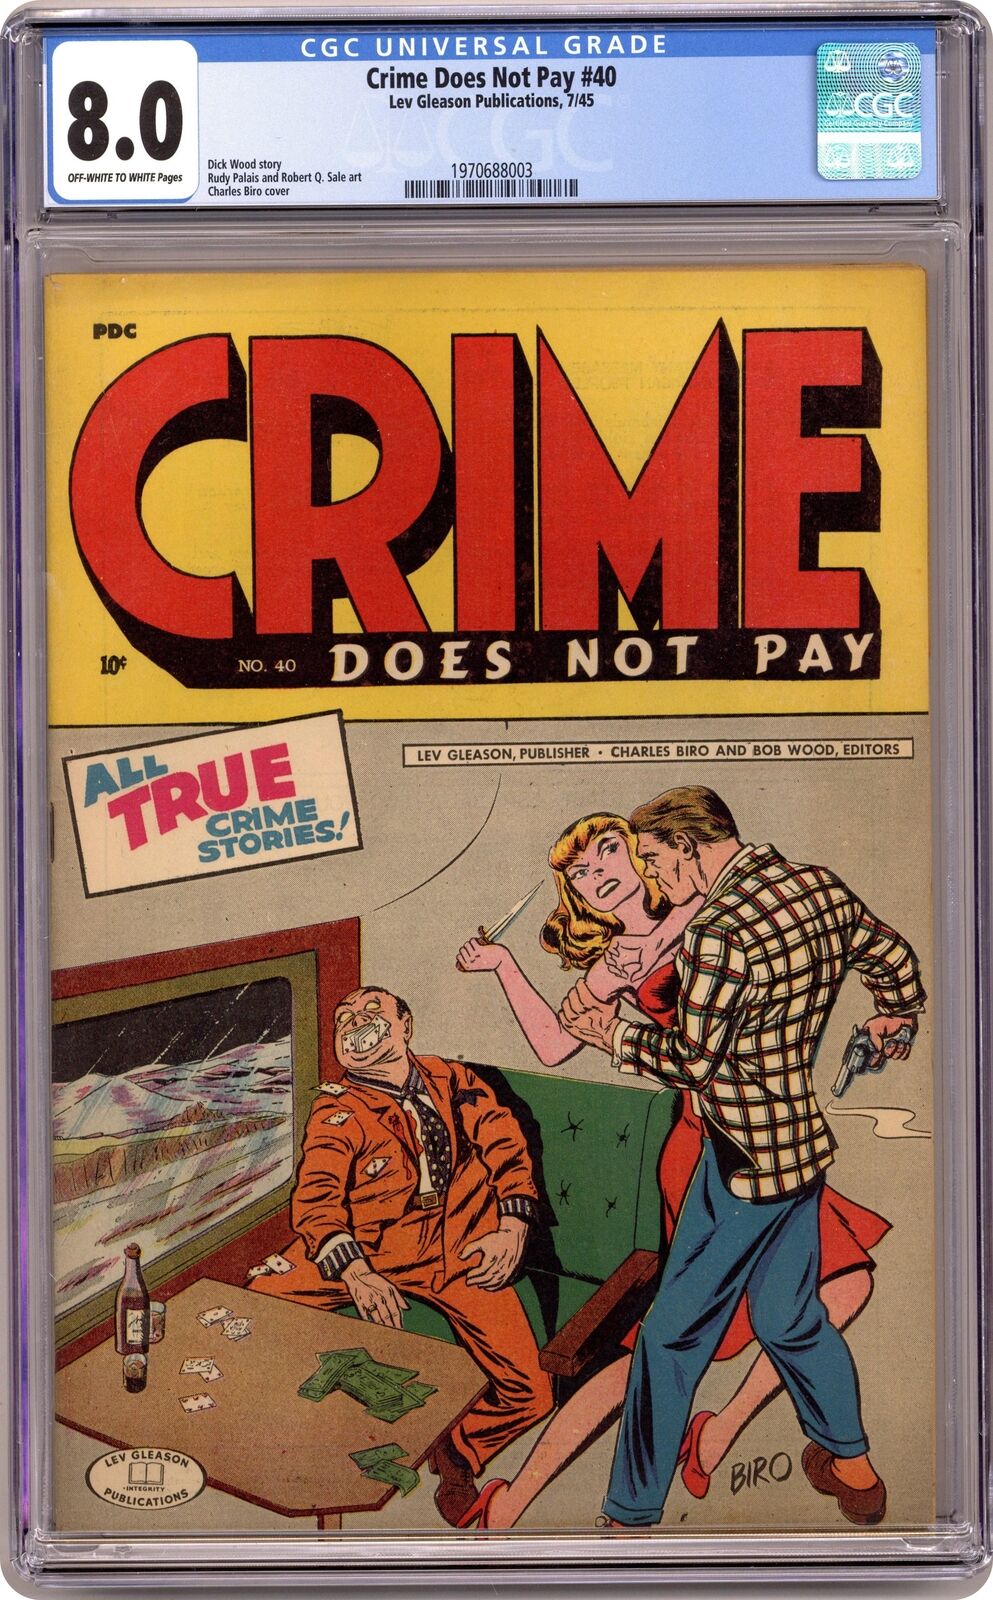 Crime Does Not Pay #40 CGC 8.0 1945 1970688003